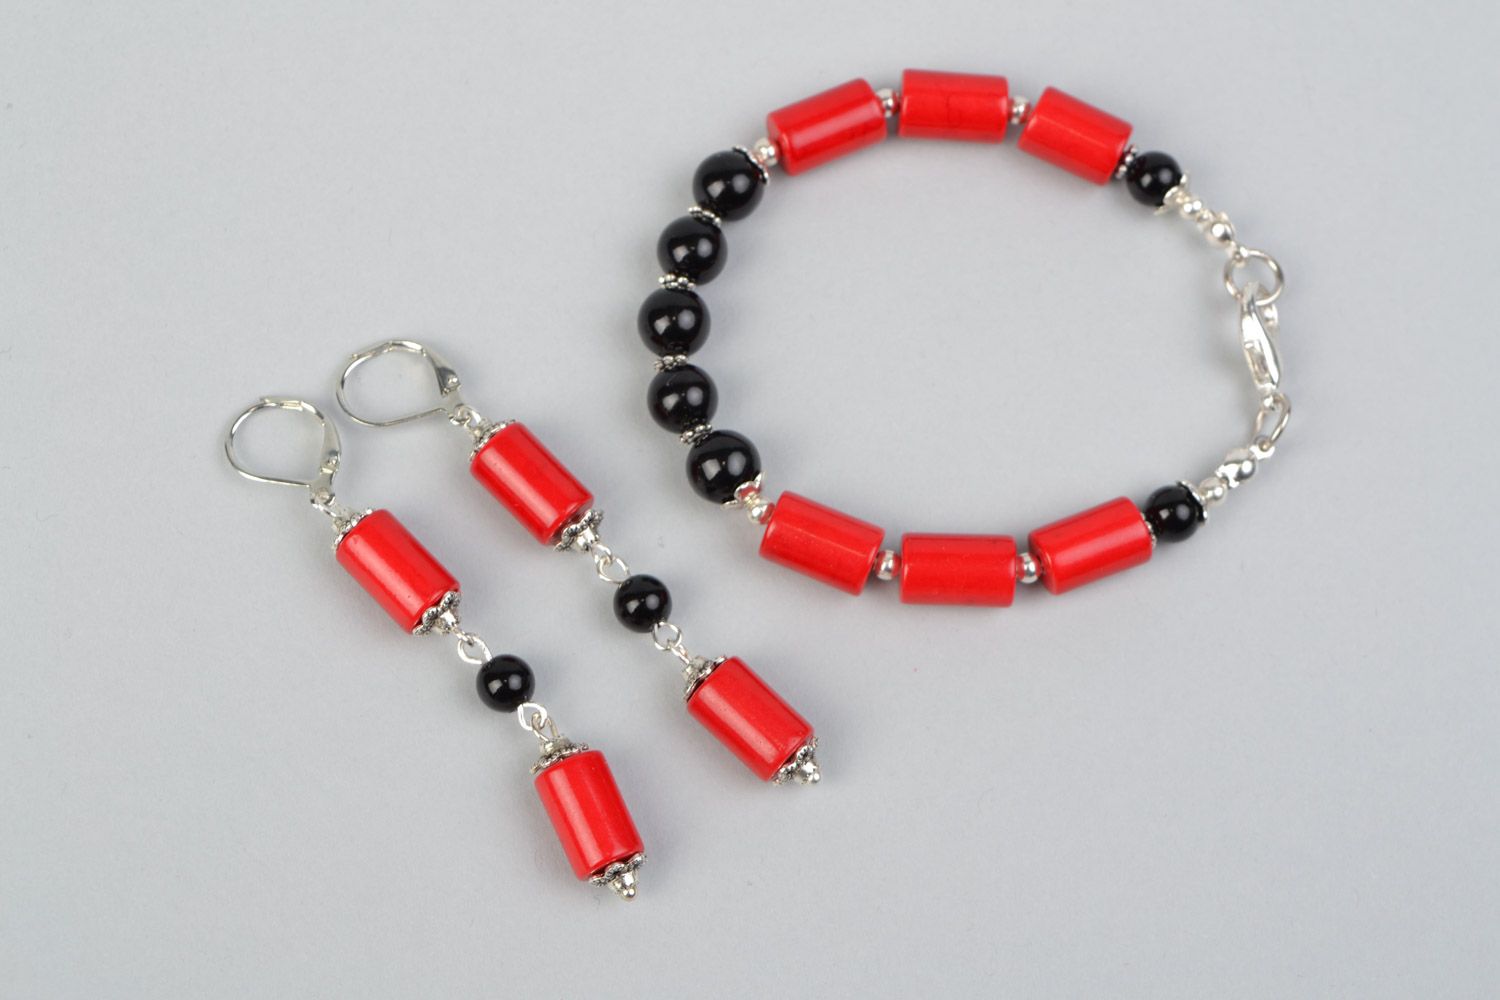 Handmade colorful natural stone jewelry set agate ad coral bracelet and earrings photo 1